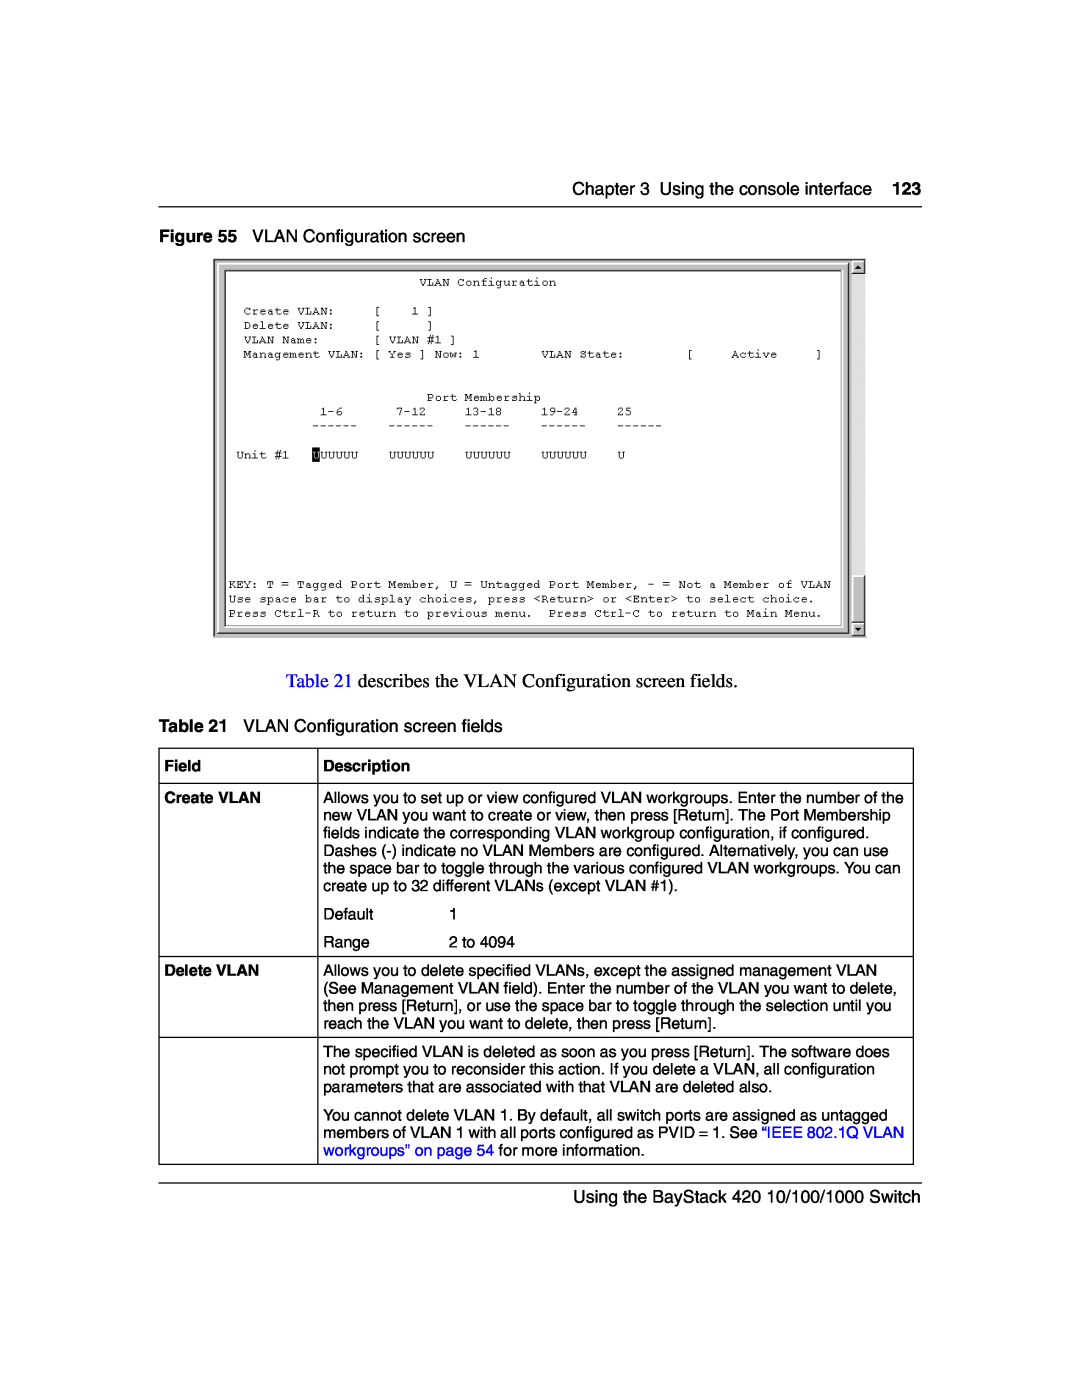 Nortel Networks 1000BASE-ZX, 1000BASE-SX manual describes the VLAN Configuration screen fields, Using the console interface 